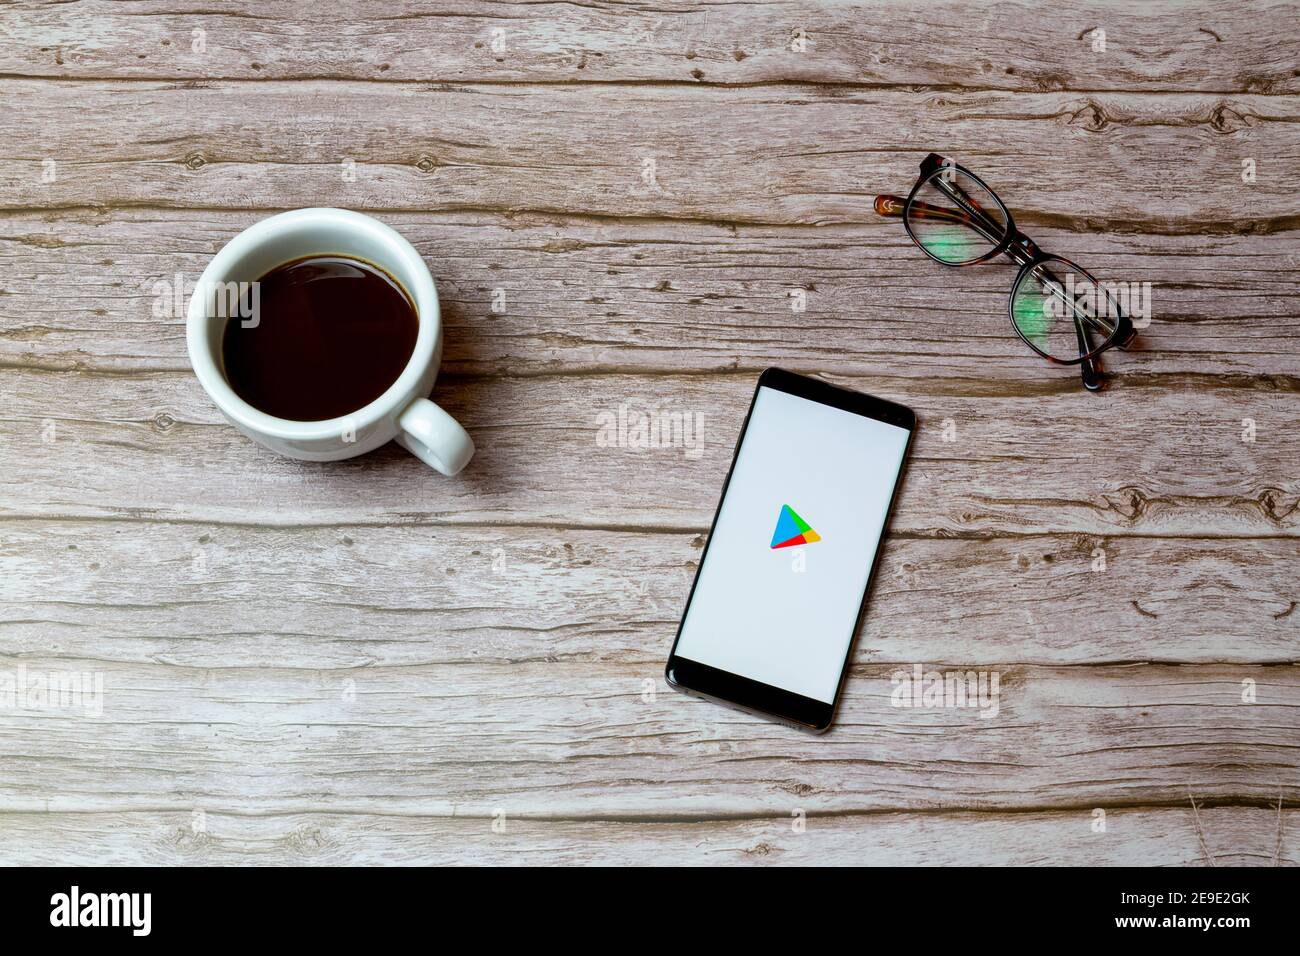 A Mobile phone or cell phone laid on a table or desk with the Google play store app open and a coffee next to it Stock Photo